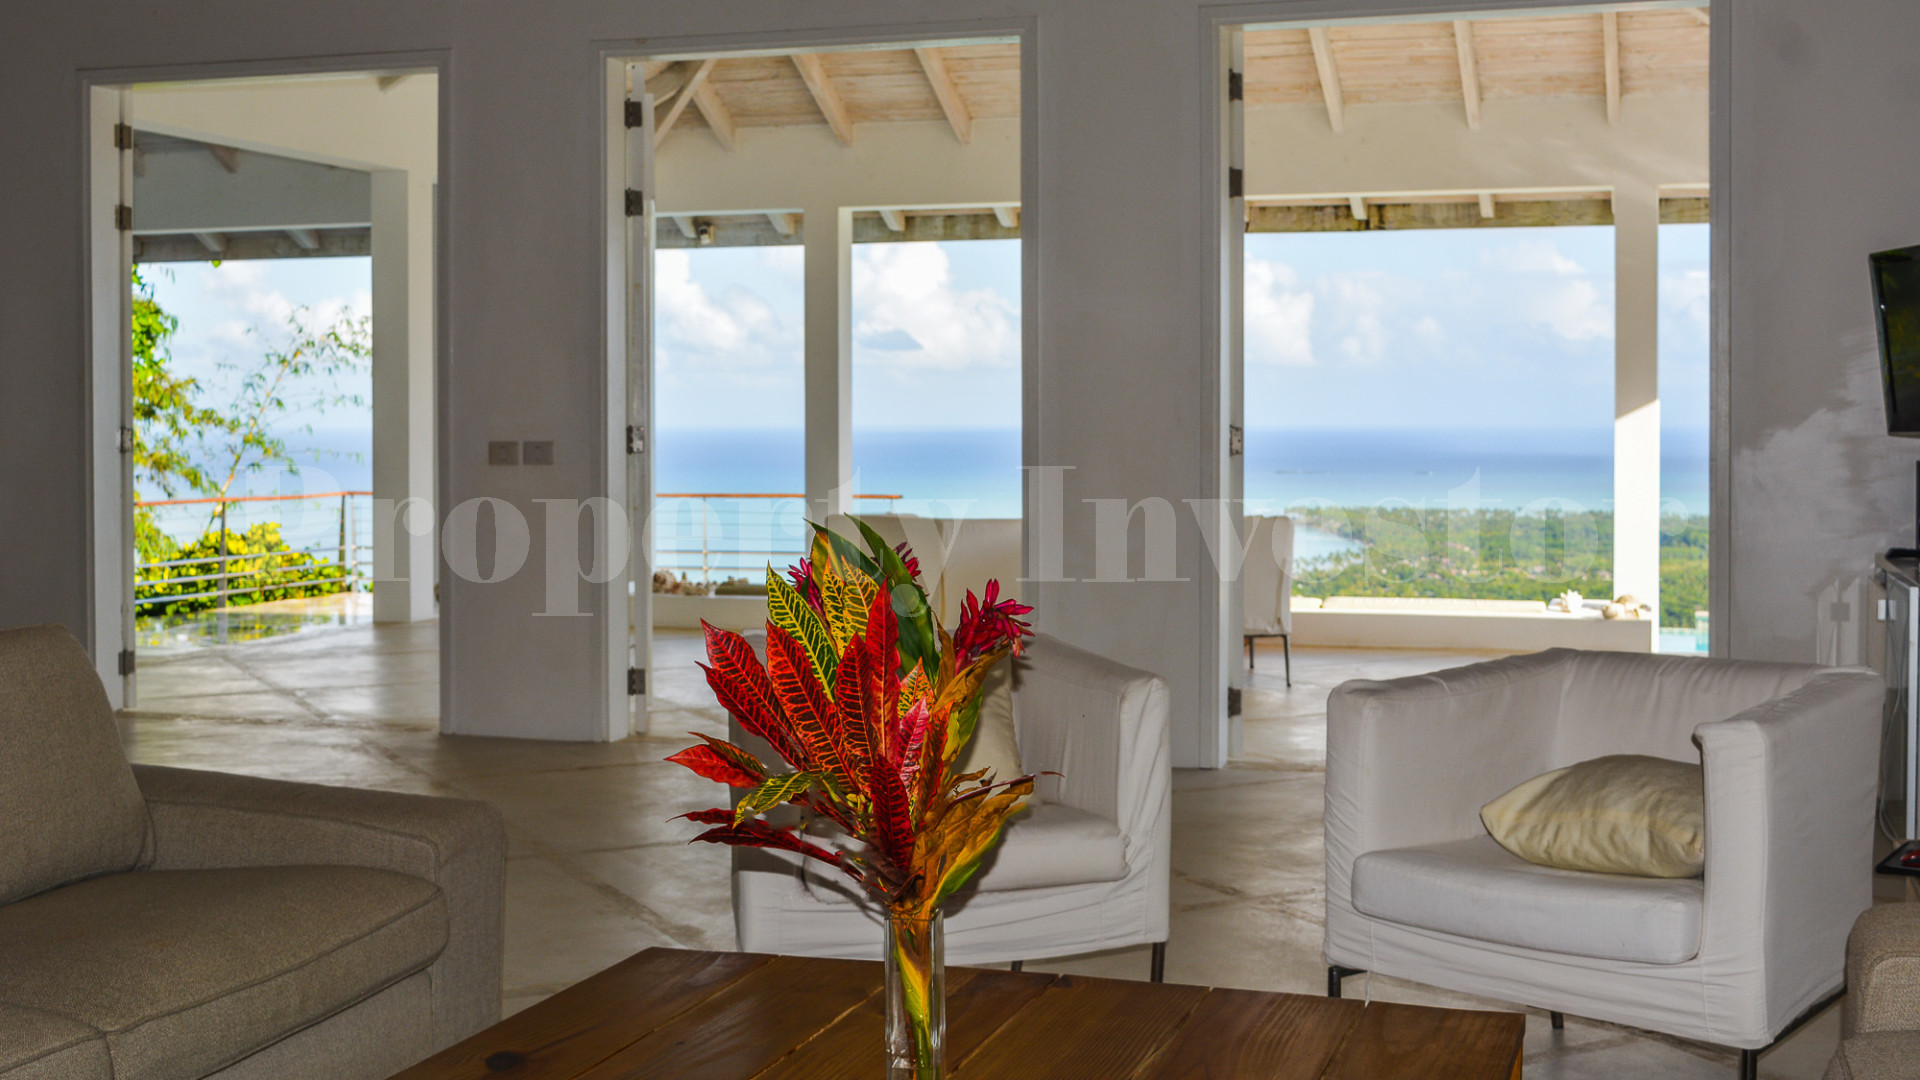 One-of-a-Kind 7 Bedroom Luxury Mountain Villa with Amazing Panoramic Sea Views and Massive Lot Near Las Terrenas